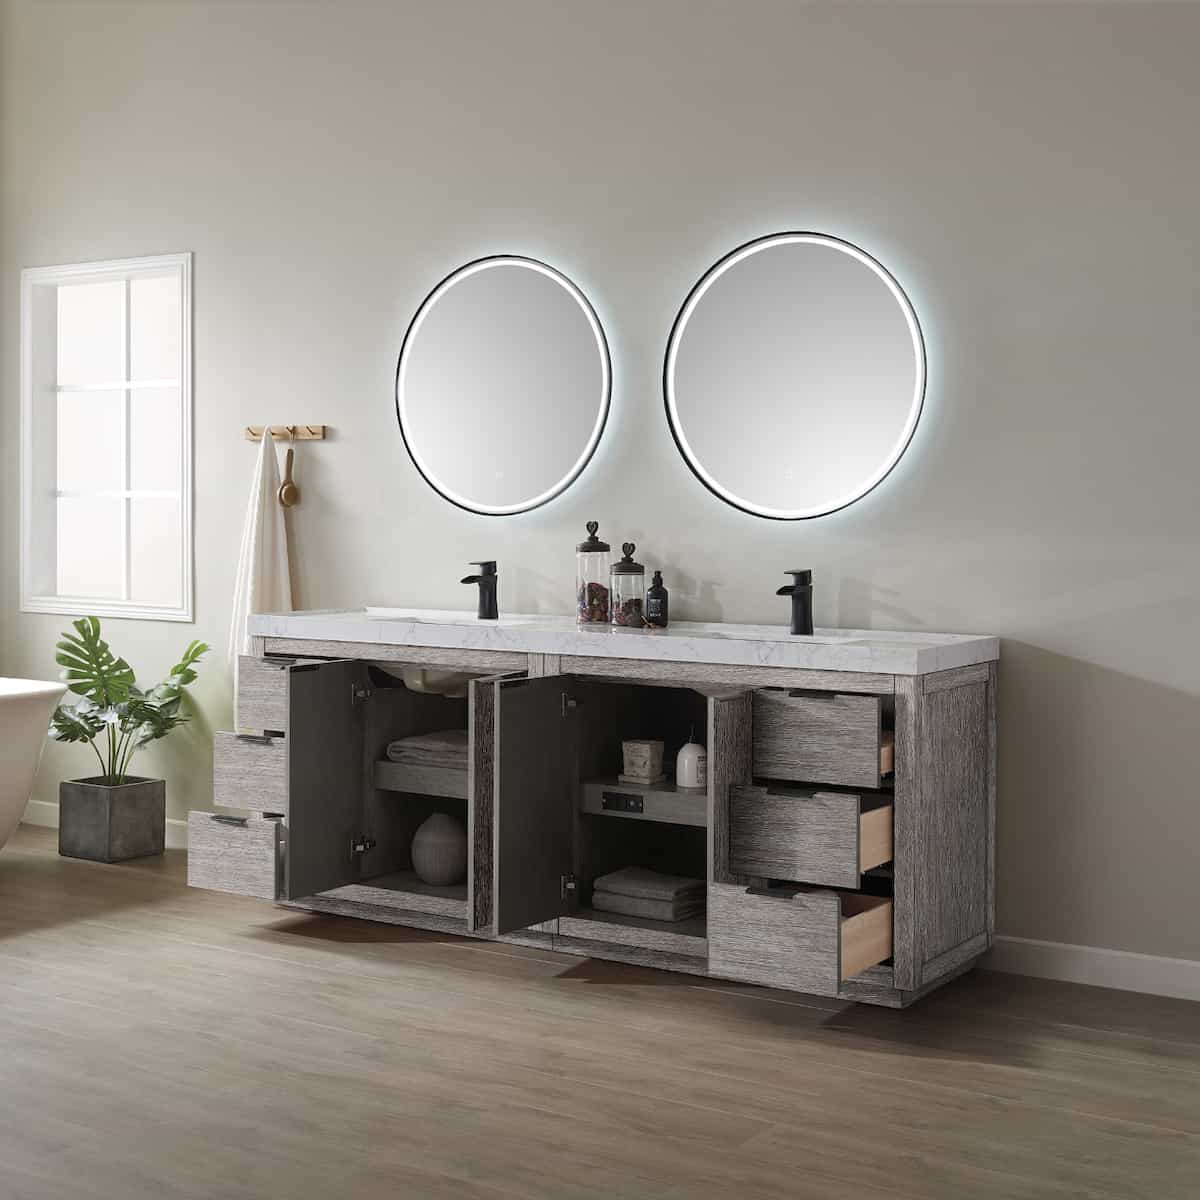 Vinnova Leiza 84 Inch Freestanding Double Vanity in Classical Grey with White Composite Grain Countertop With Mirrors Inside 701584-CR-GW